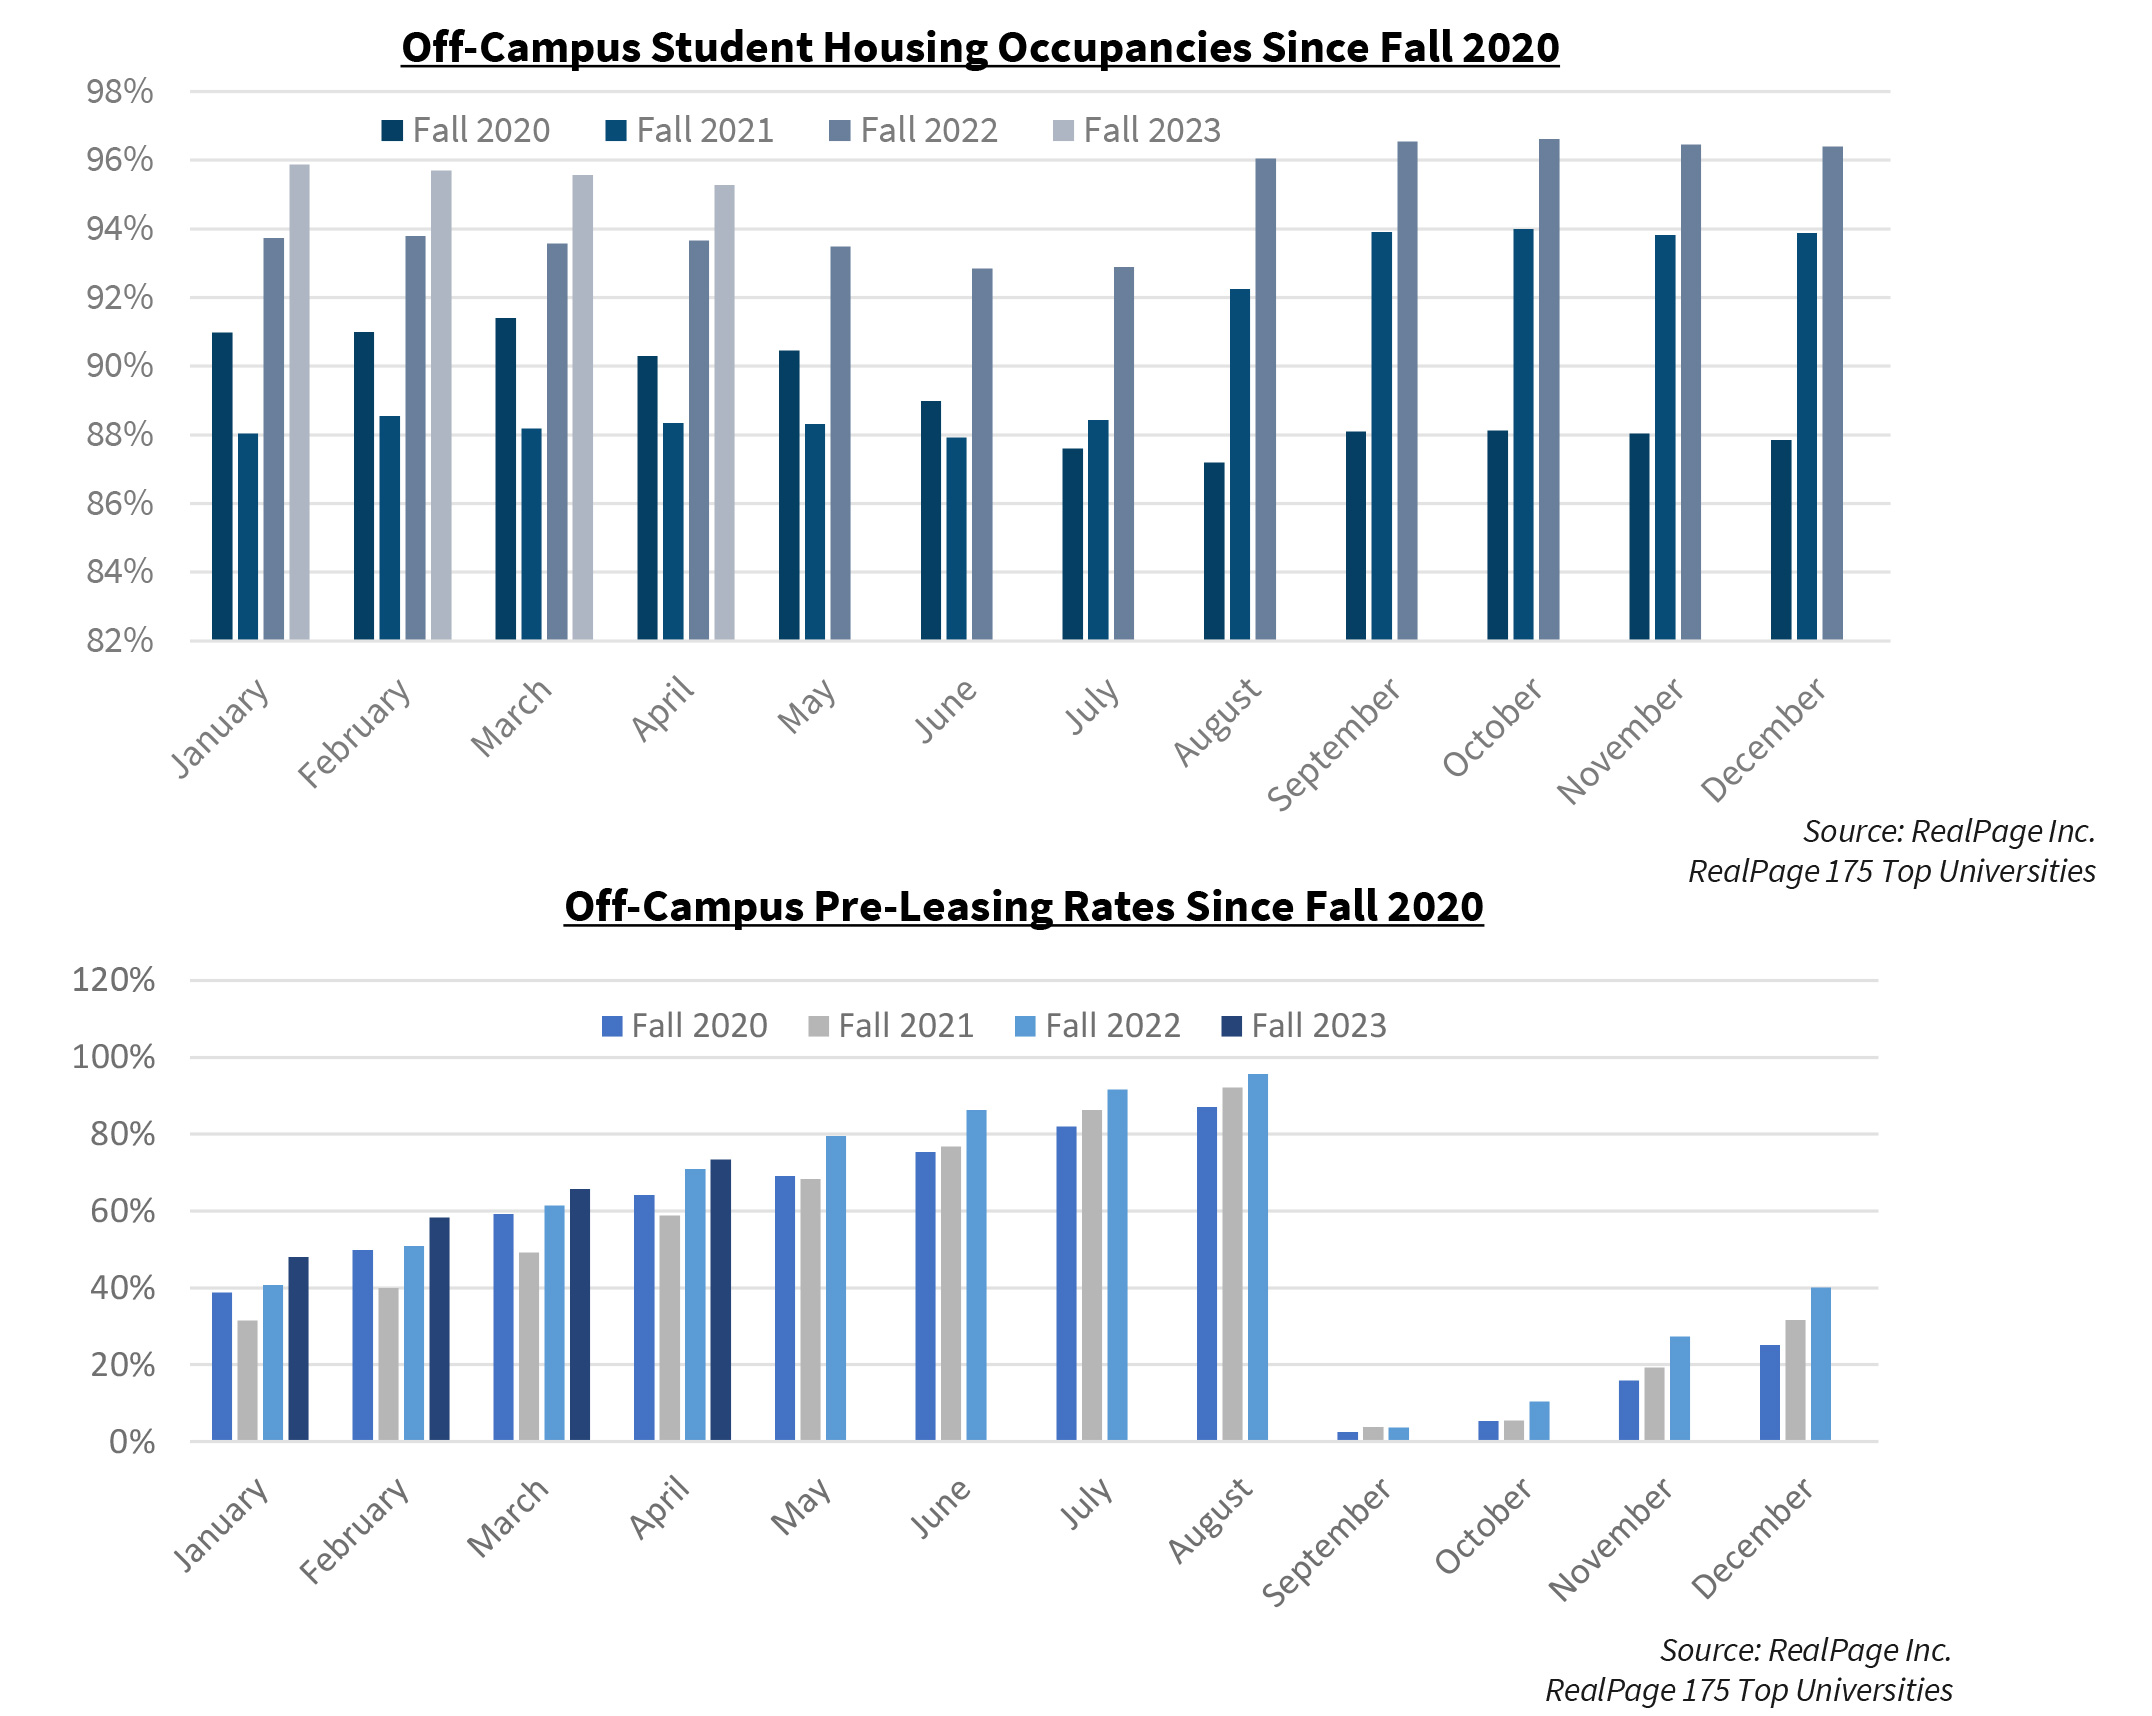 Off-Campus Student Housing Occupancies Since Fall 2020 | Off-Campus Pre-Leasing Rates Since Fall 2020